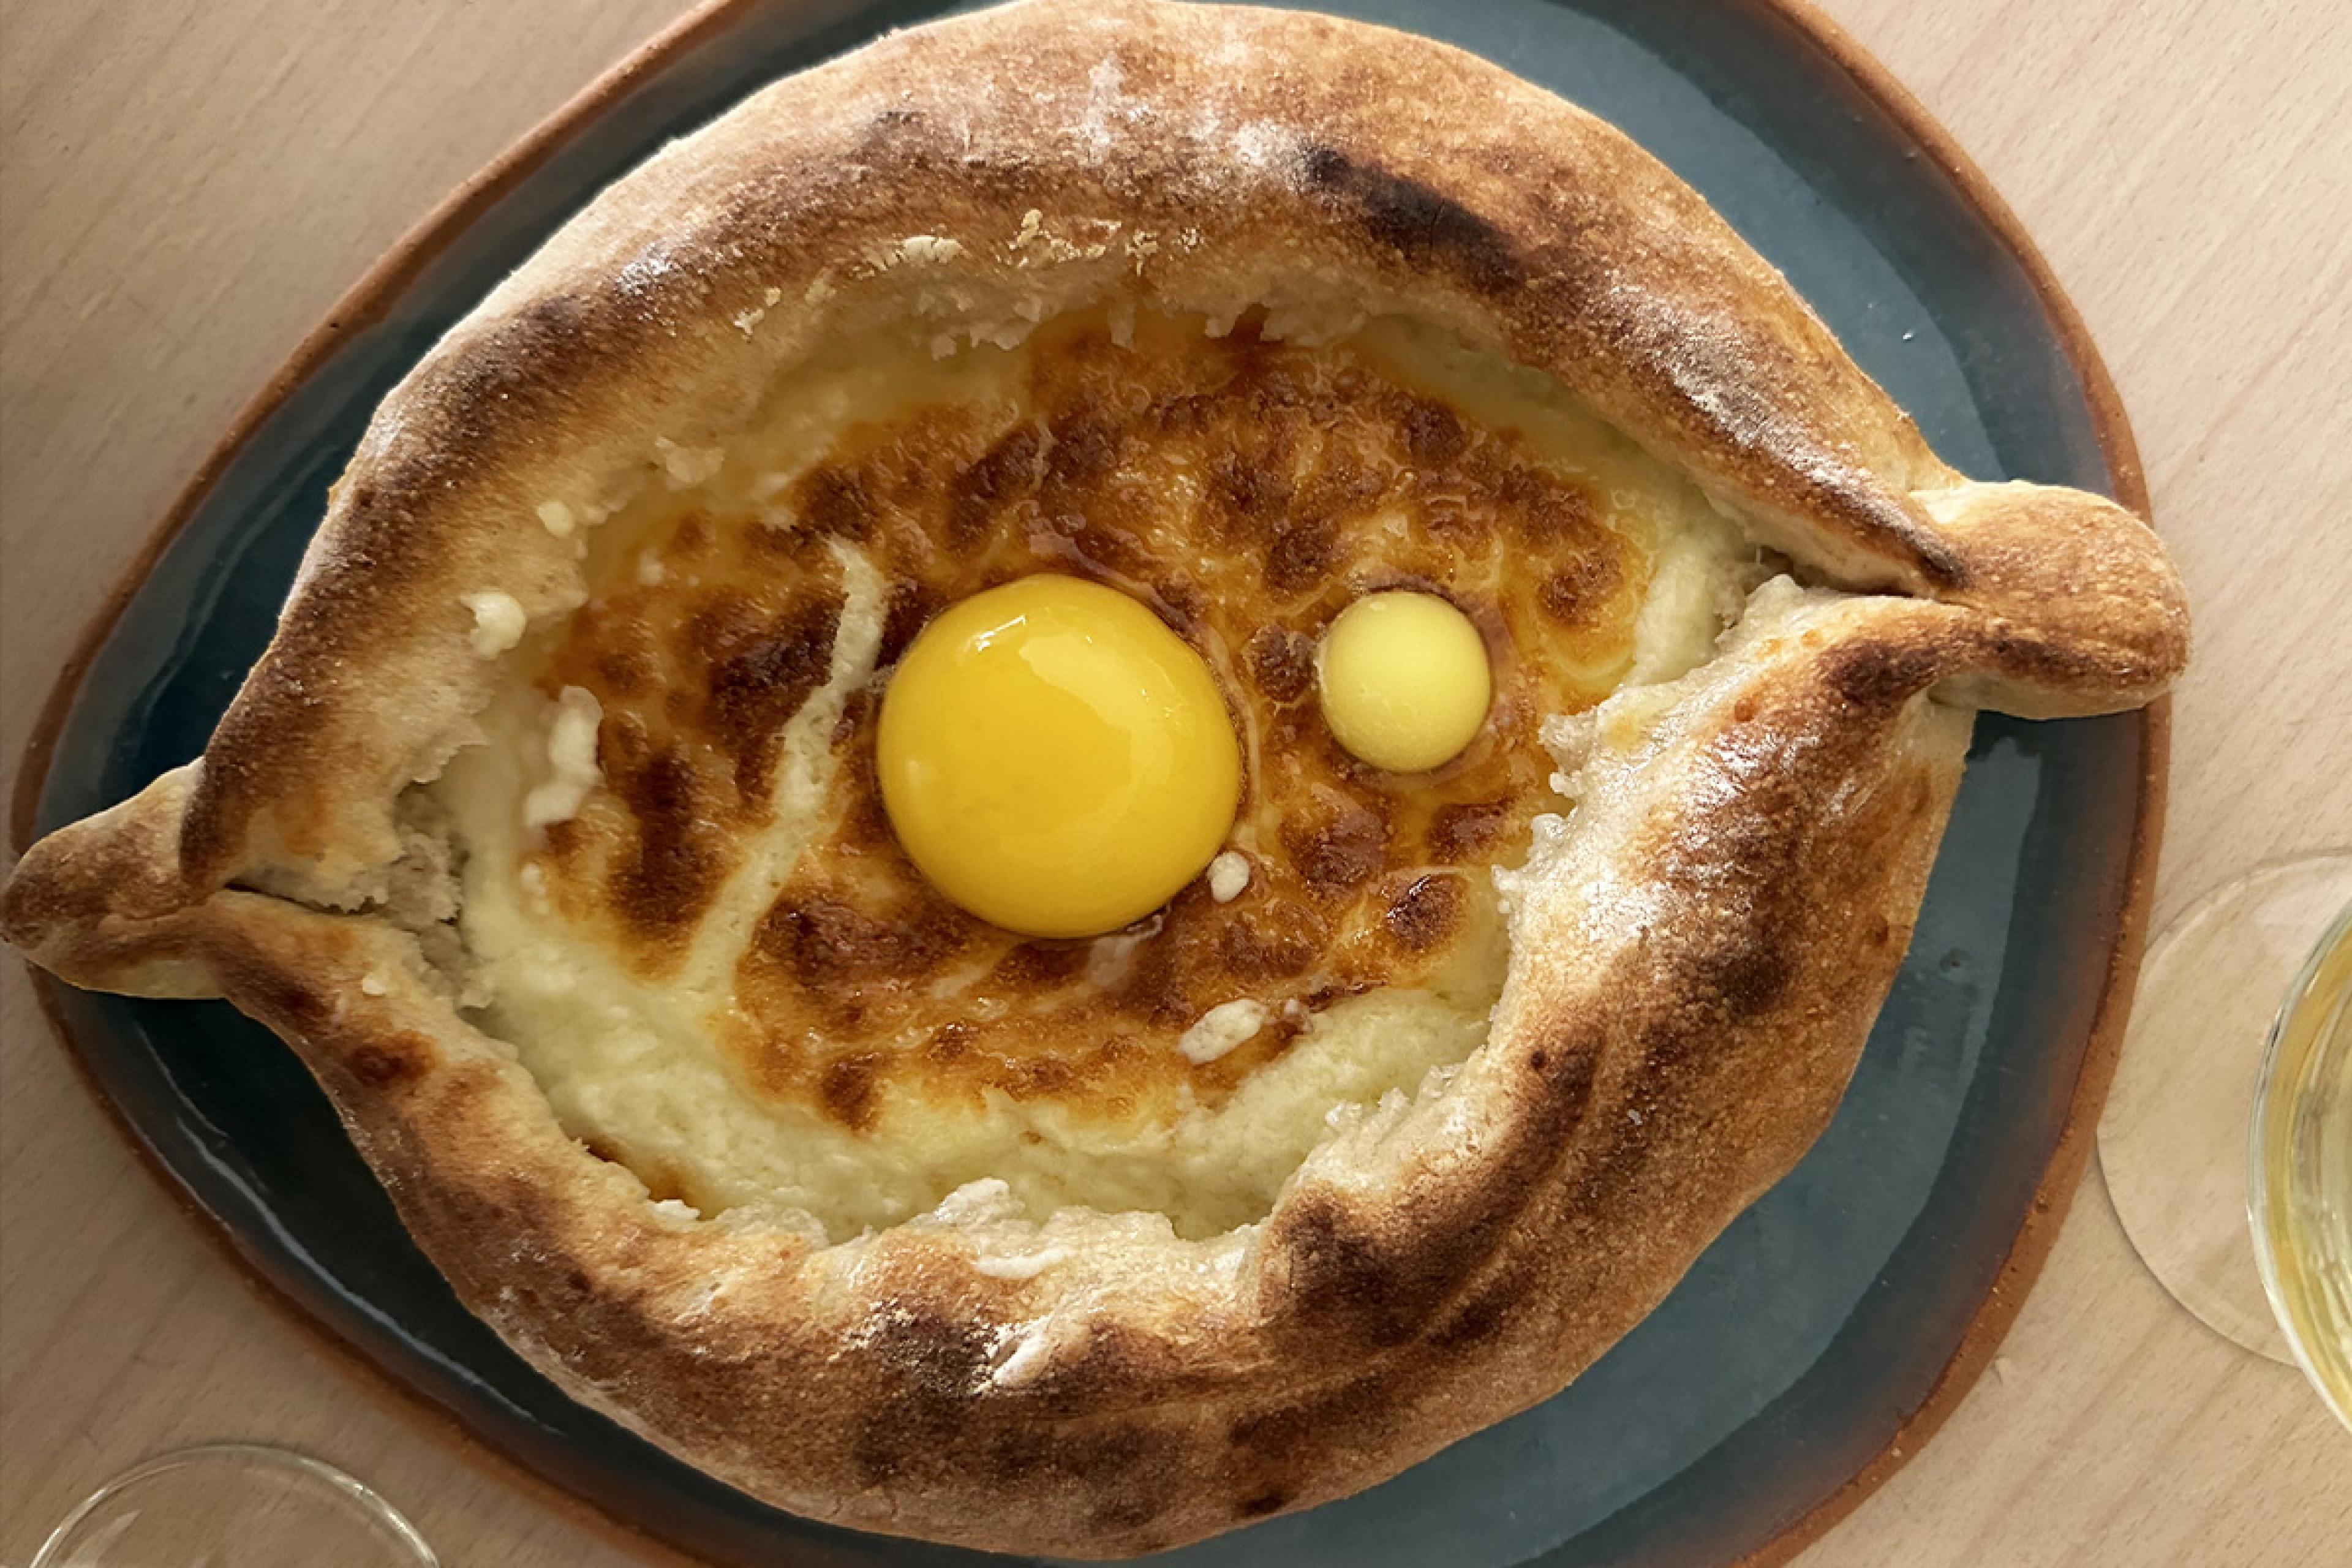 cheese stuffed bread with an egg